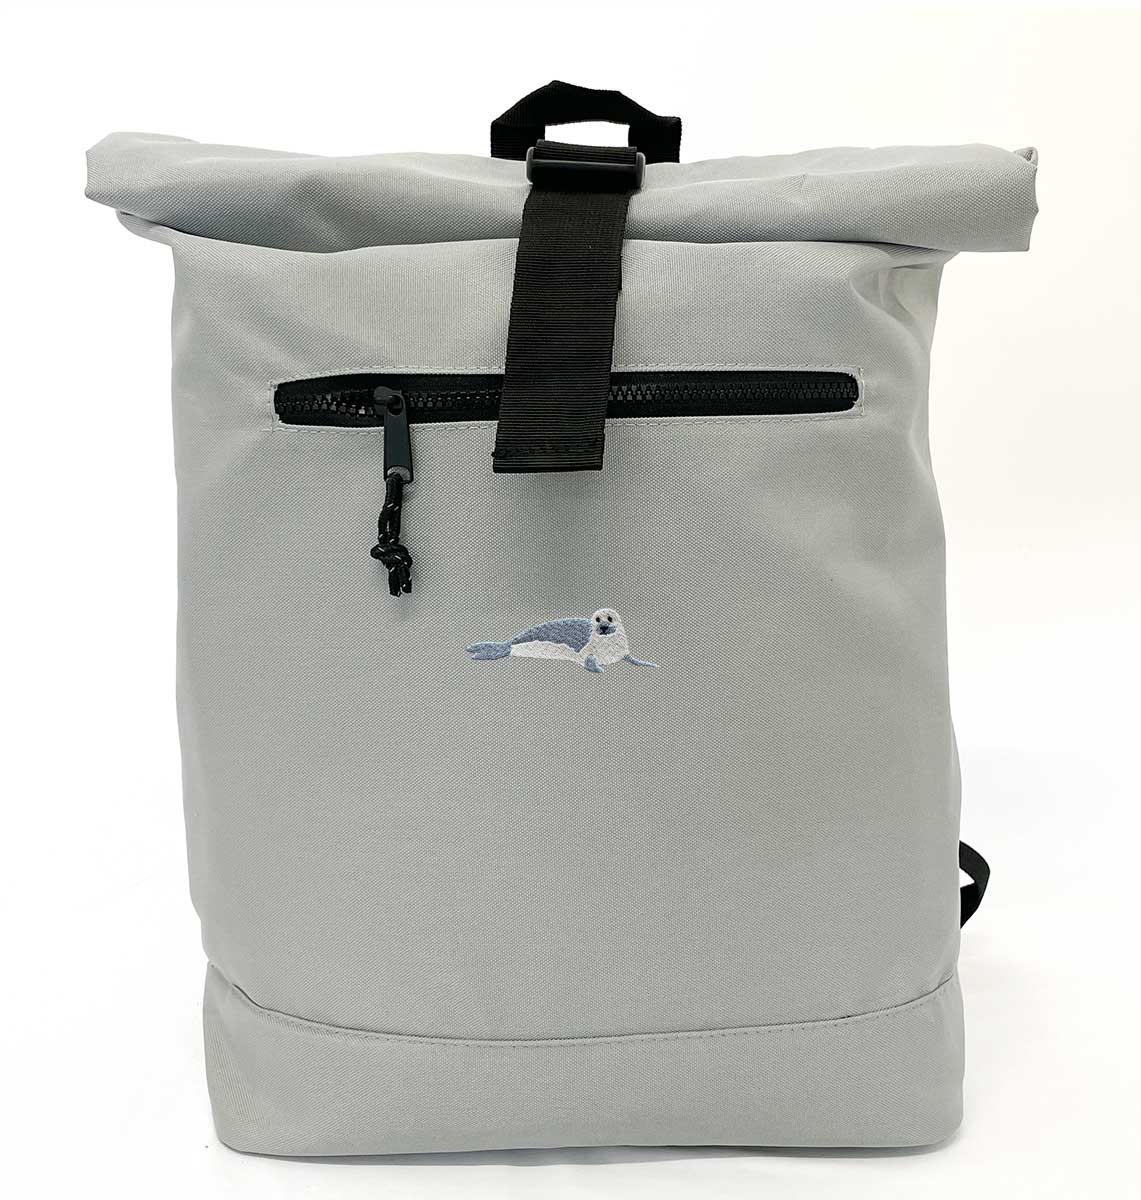 Seal Beach Roll-top Recycled Backpack - Blue Panda